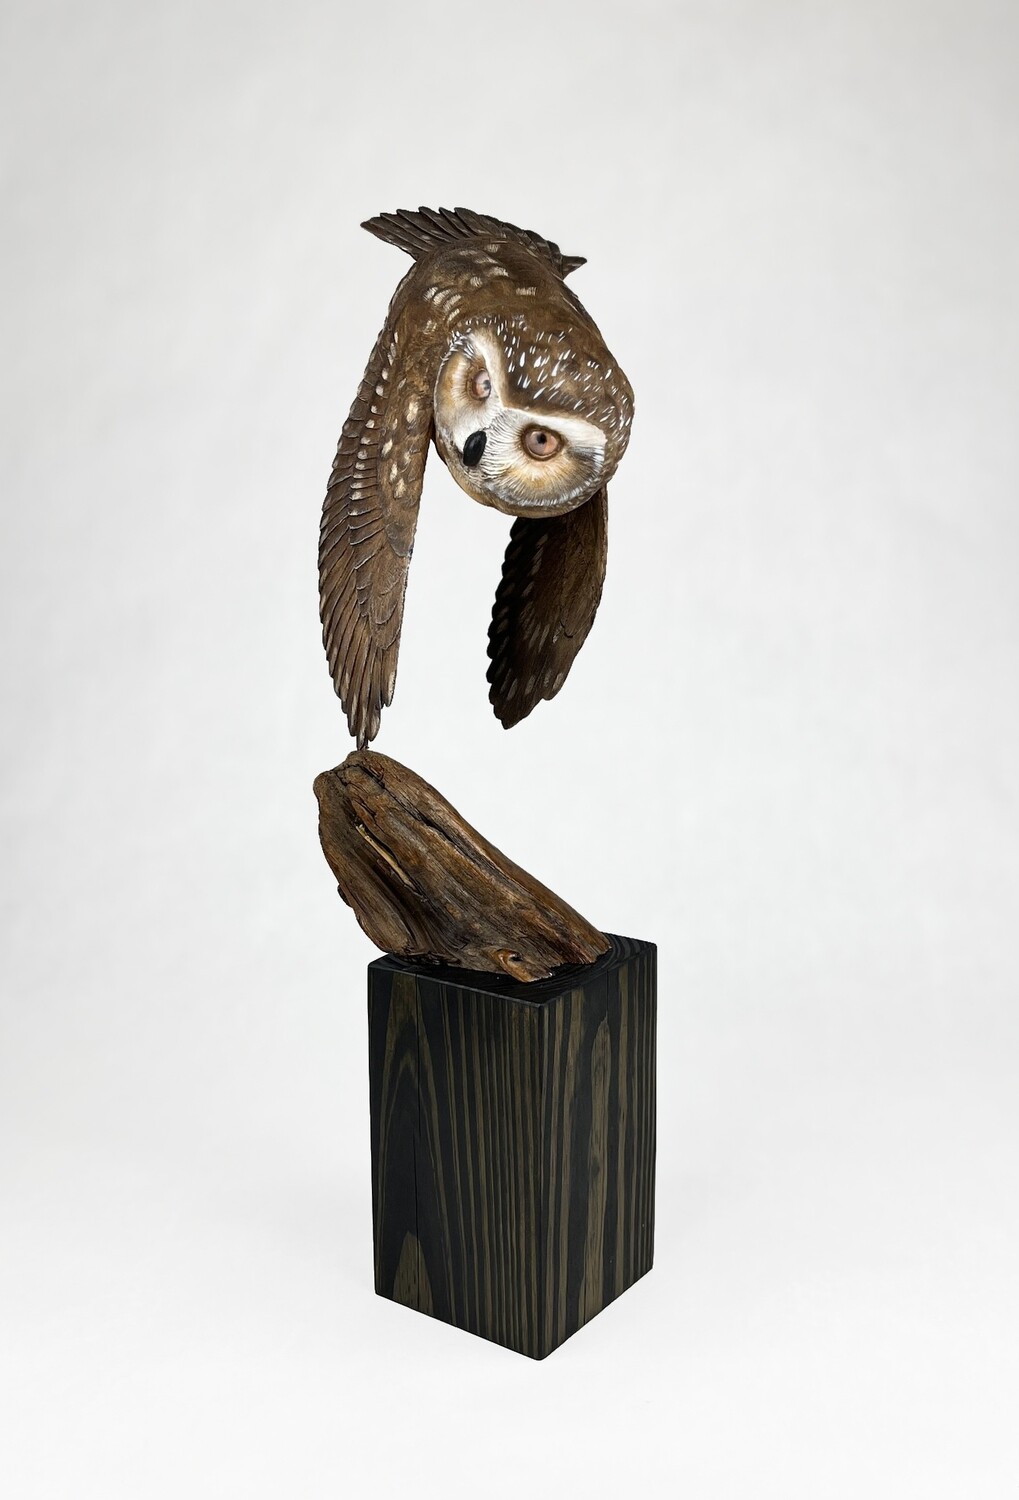 Saw Whet Owl Suspended in Flight Wood Sculpture